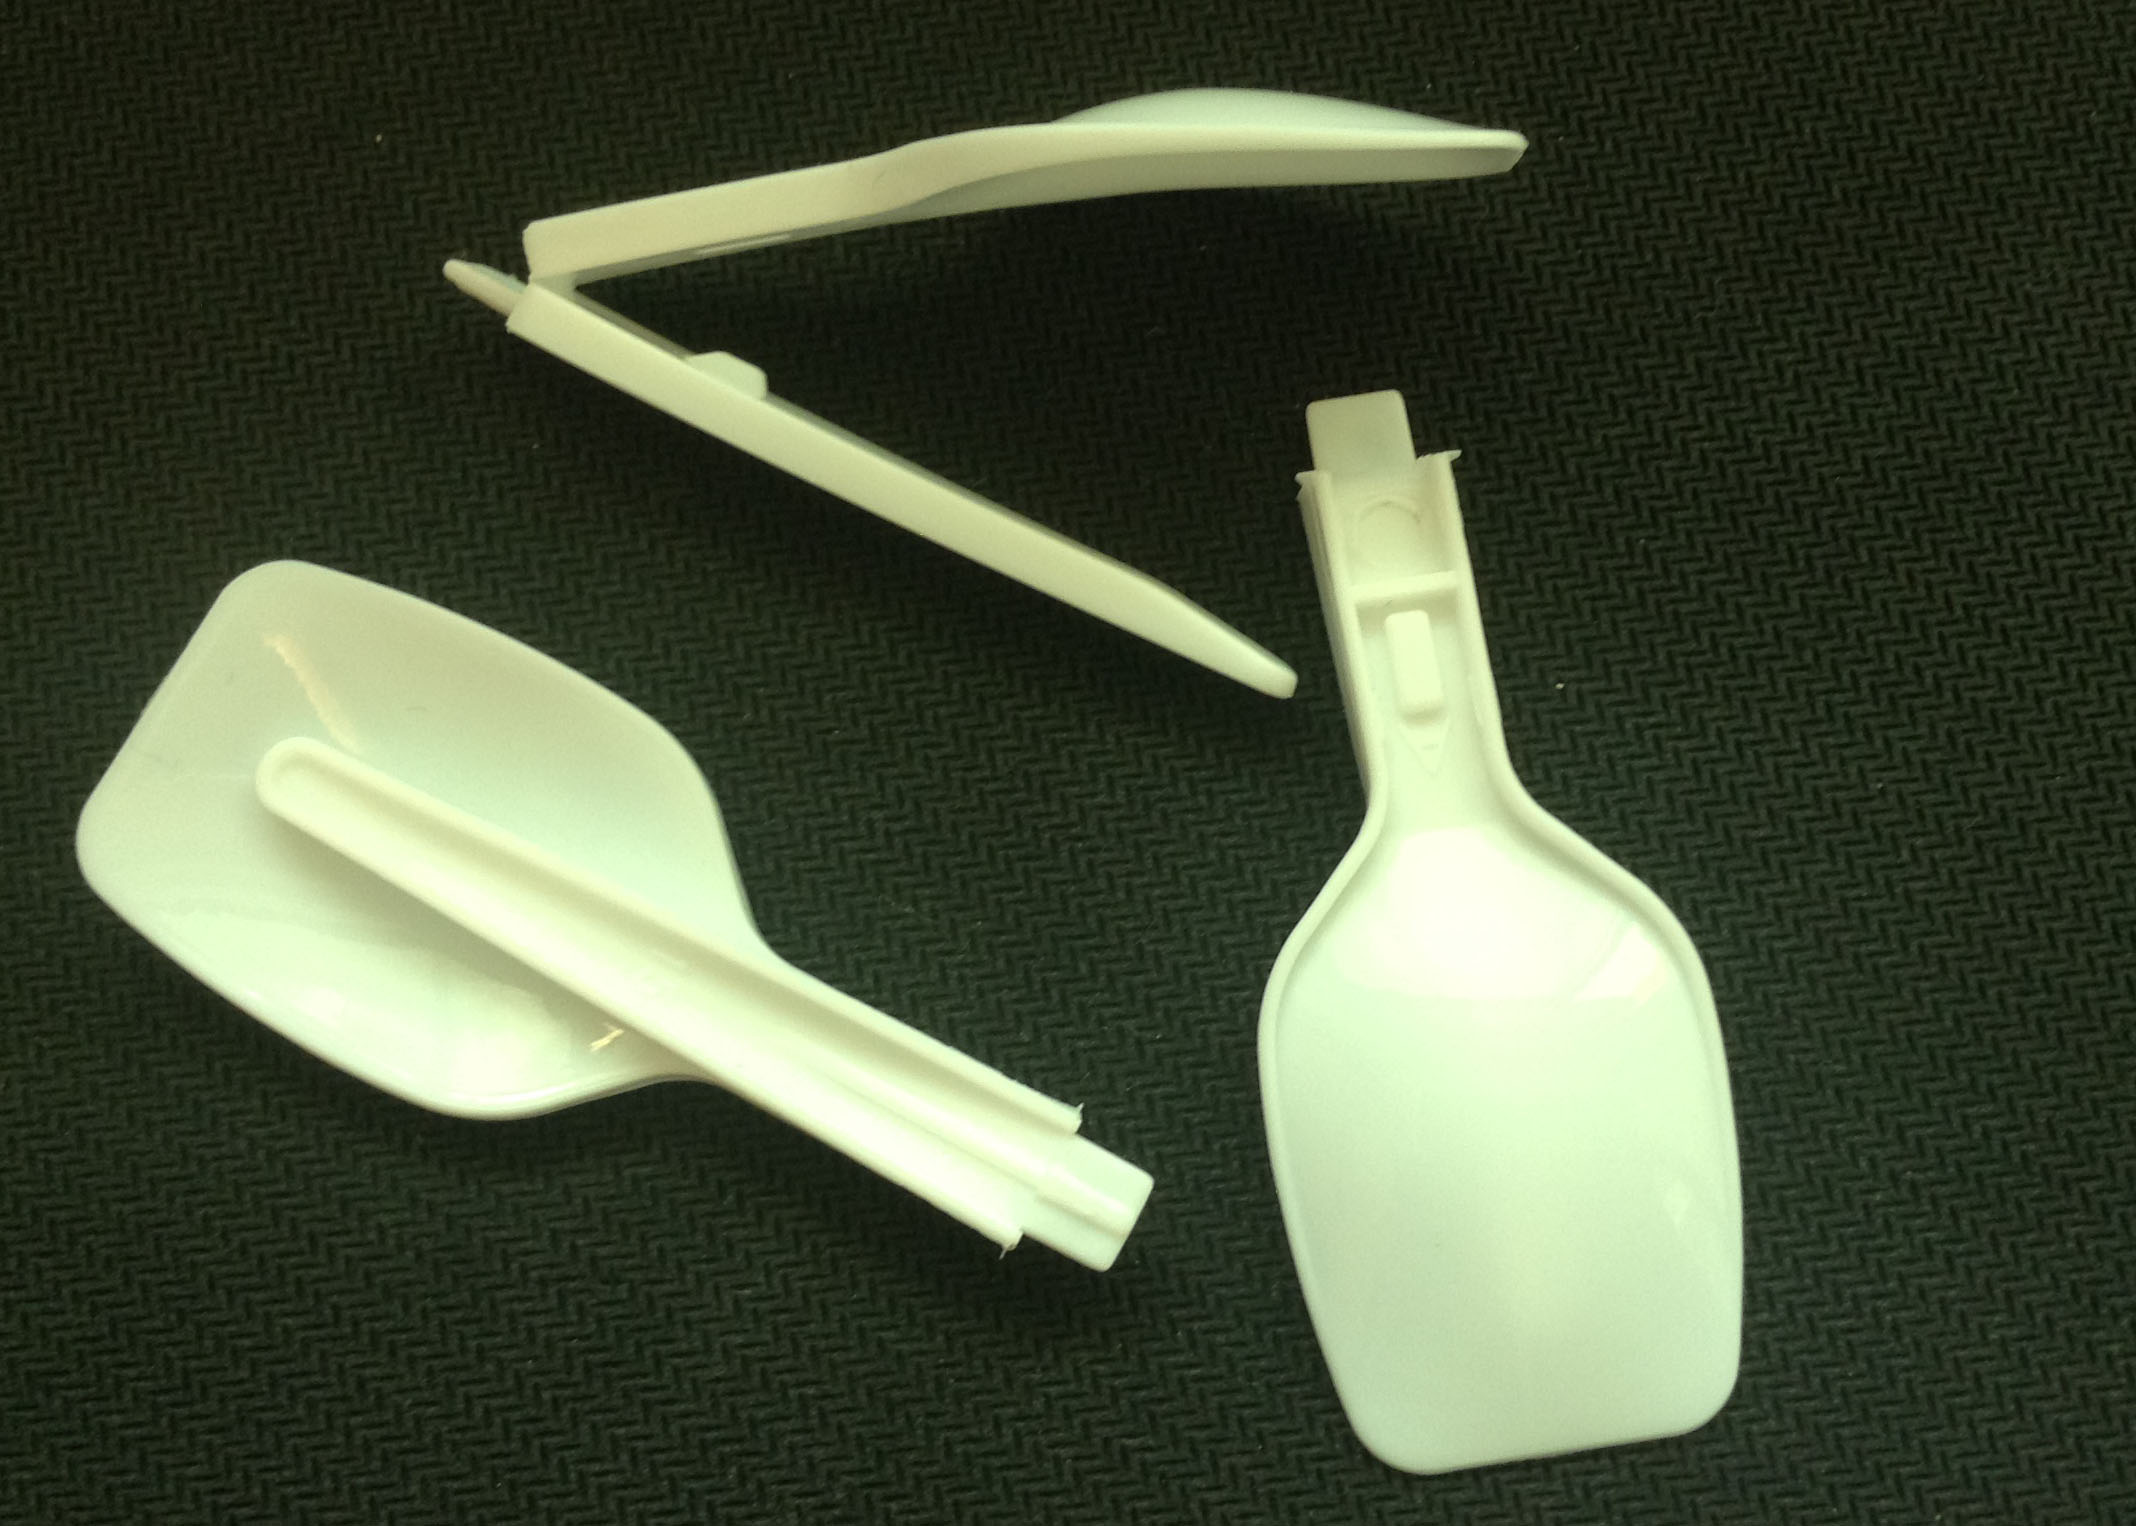 Food-grade plastic PP material folding spoon in 92 mm length folding size 54 mm